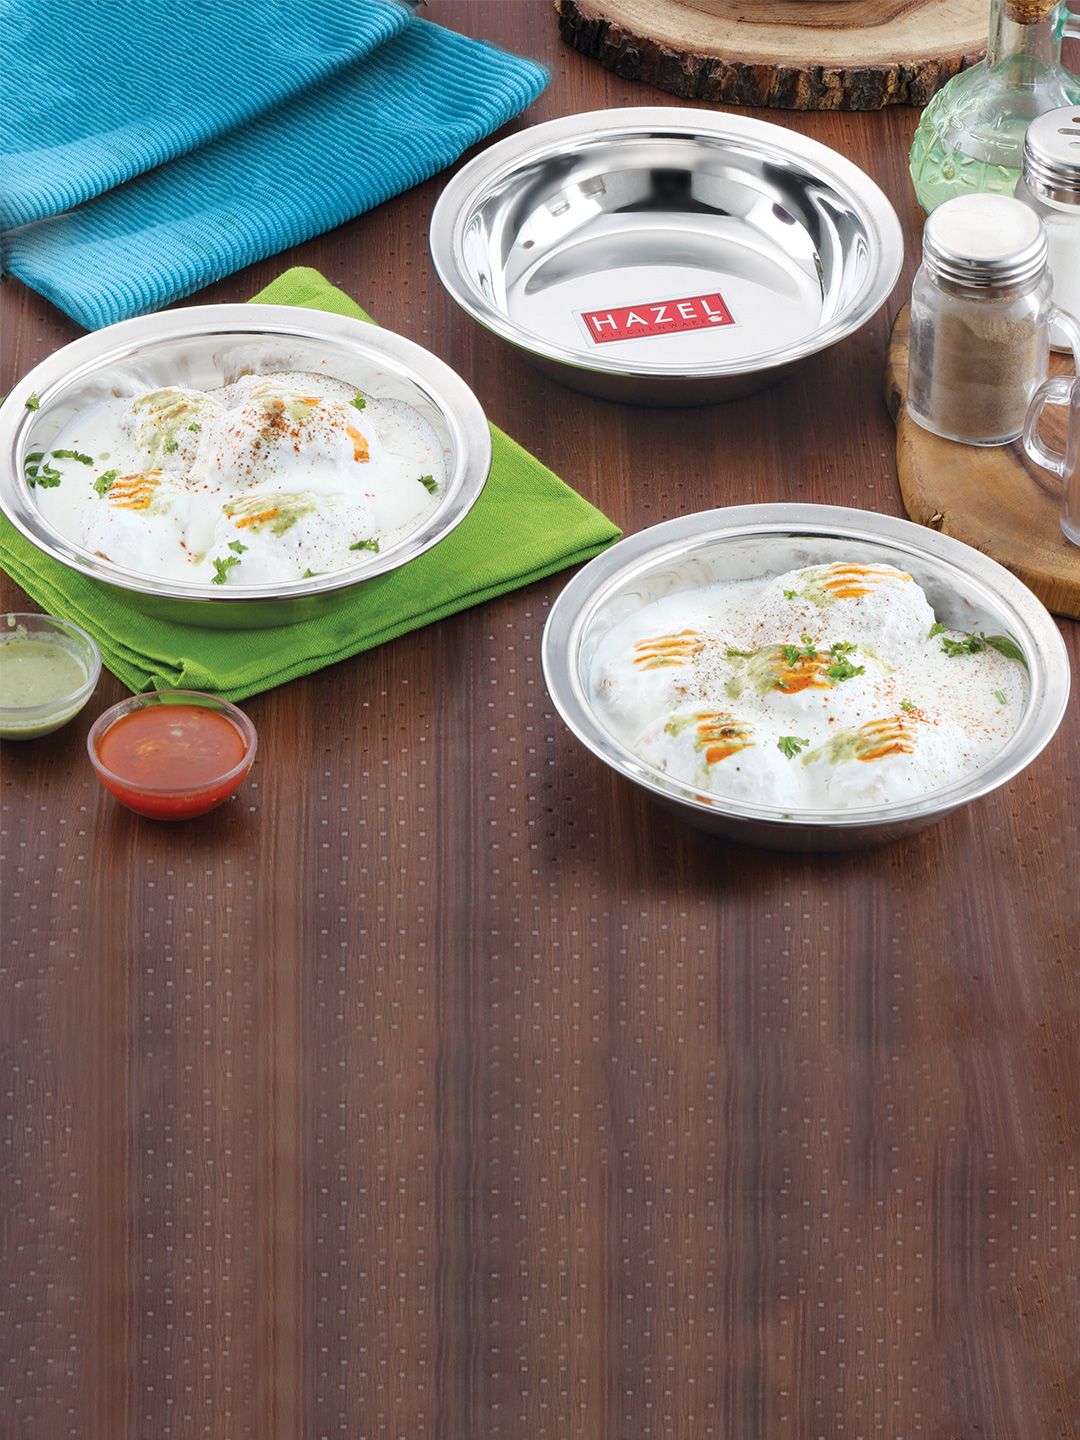 HAZEL Silver-Toned Set of 3 Serving Stainless Steel Glossy Bowl/Plate 270 ml Bowls Price in India